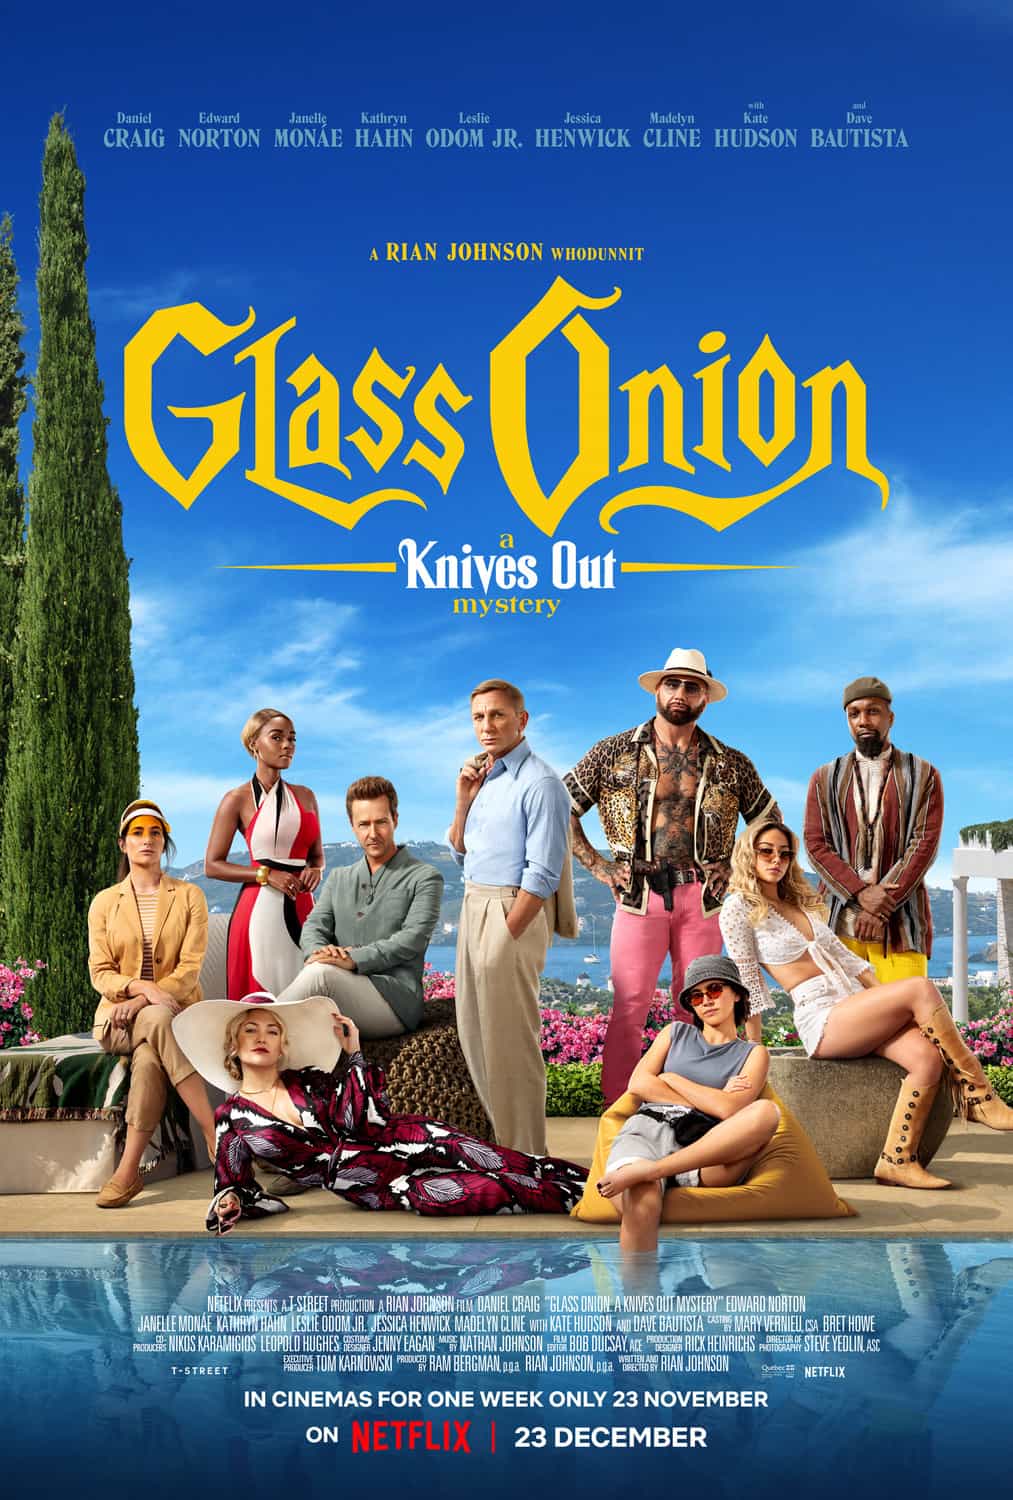 Glass Onion: A Knives Out Mystery is given a 12A age rating in the UK for infrequent strong language, moderate sex references, violence, drug misuse